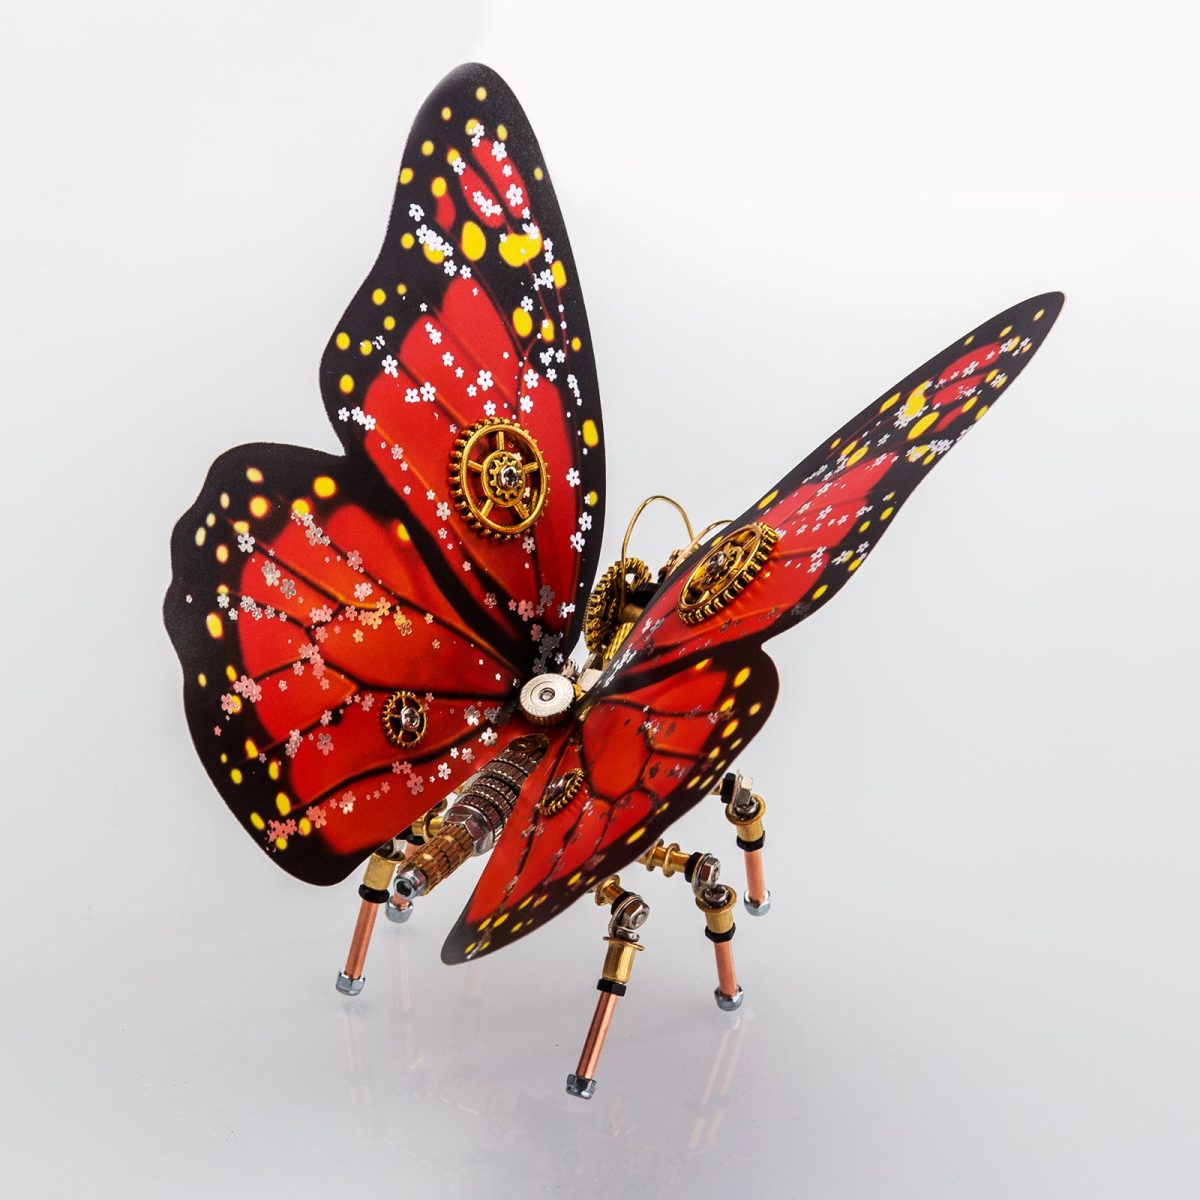 150Pcs Steampunk Scarlet Peacock Butterfly Assembly Model in Red